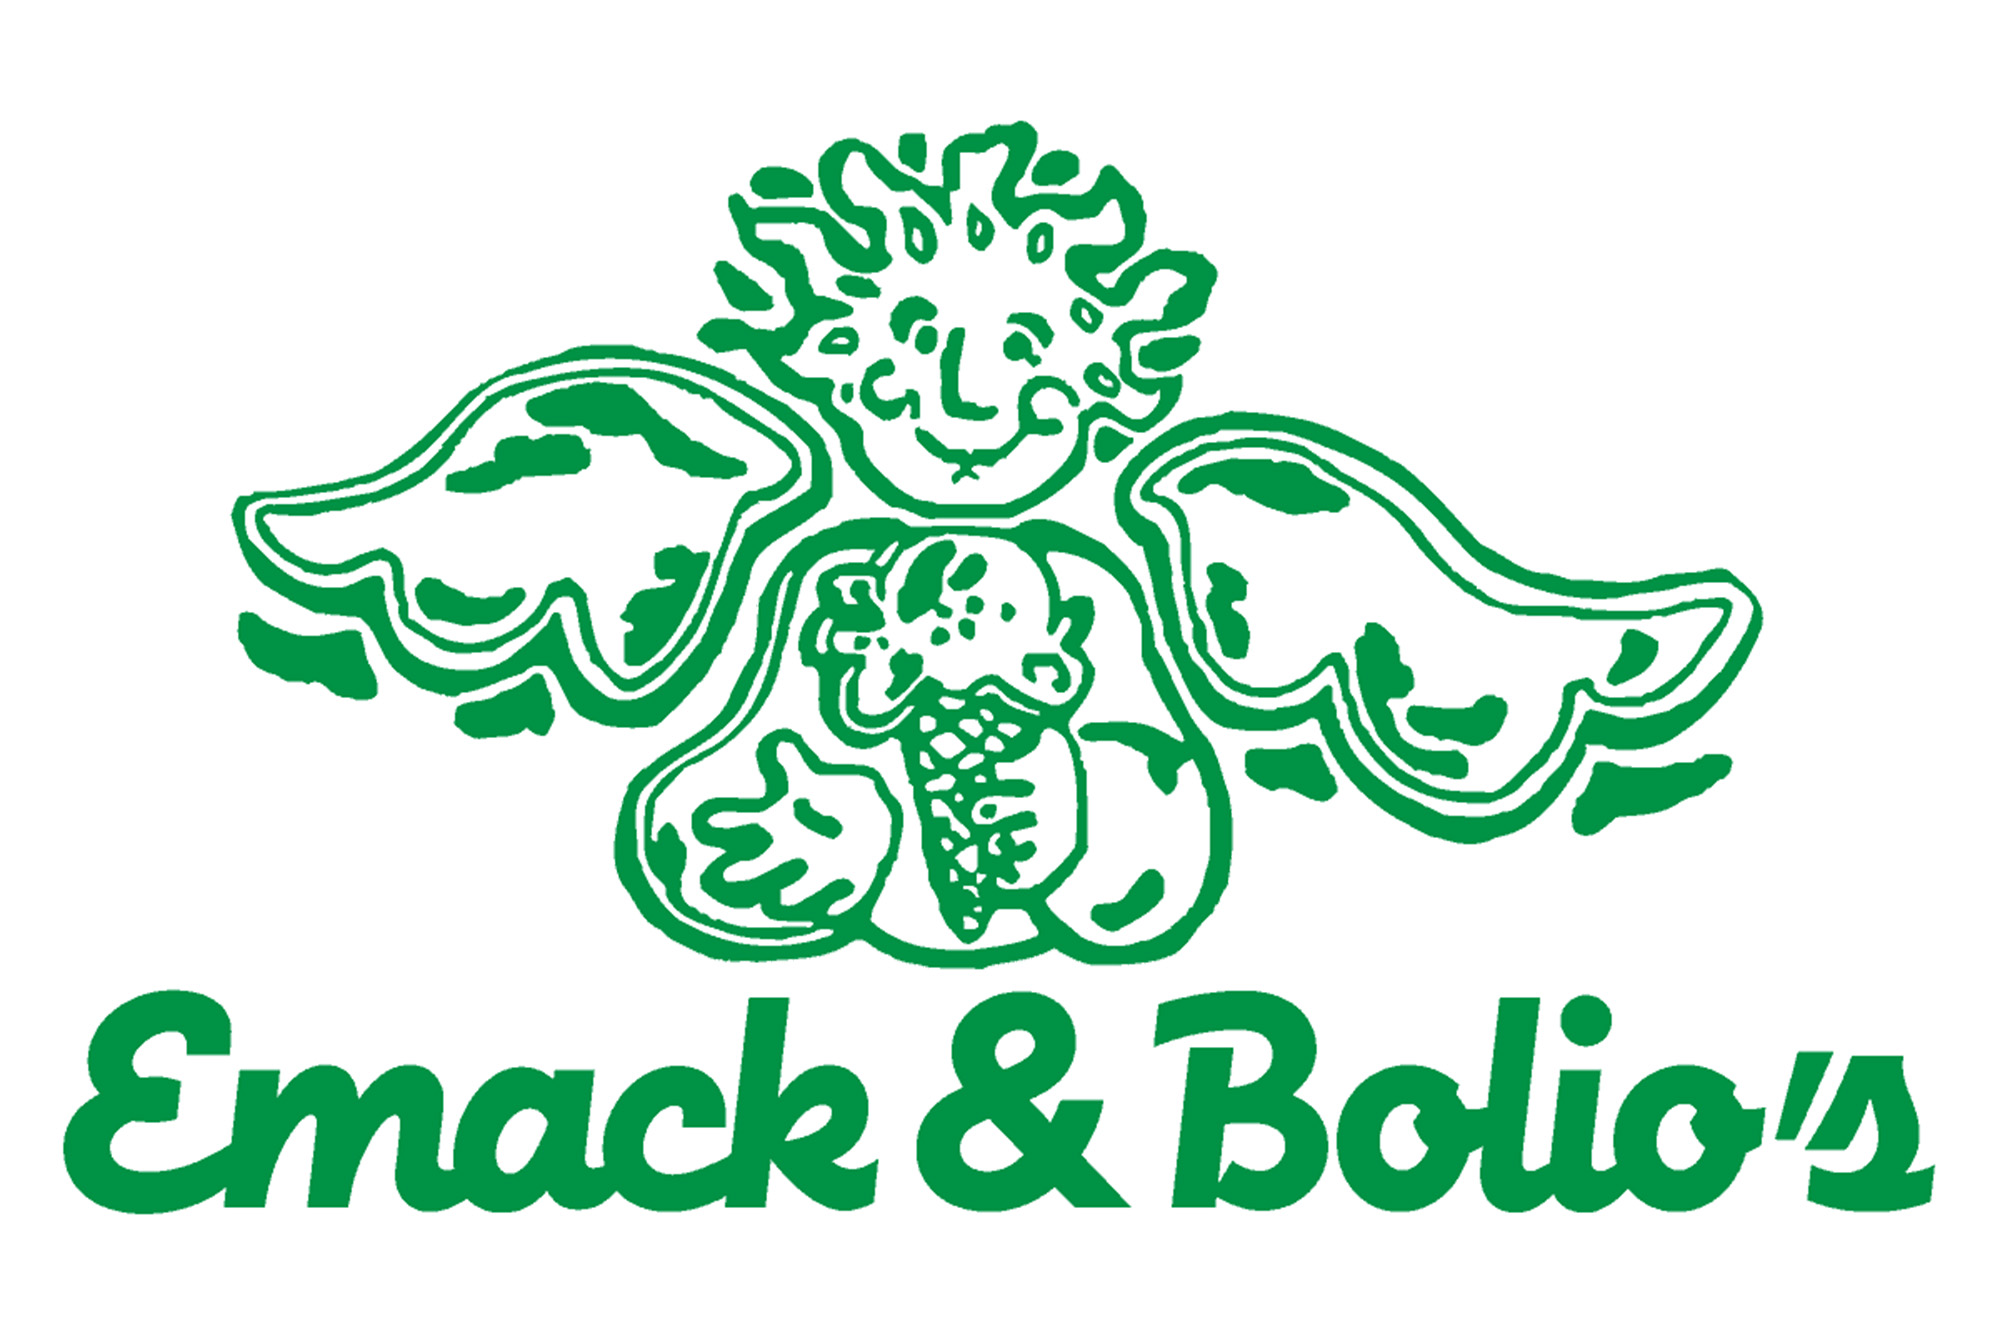 Photo: A white background with green lettering that reads Emack & Bolio's with a winged character, also in green, overtop.